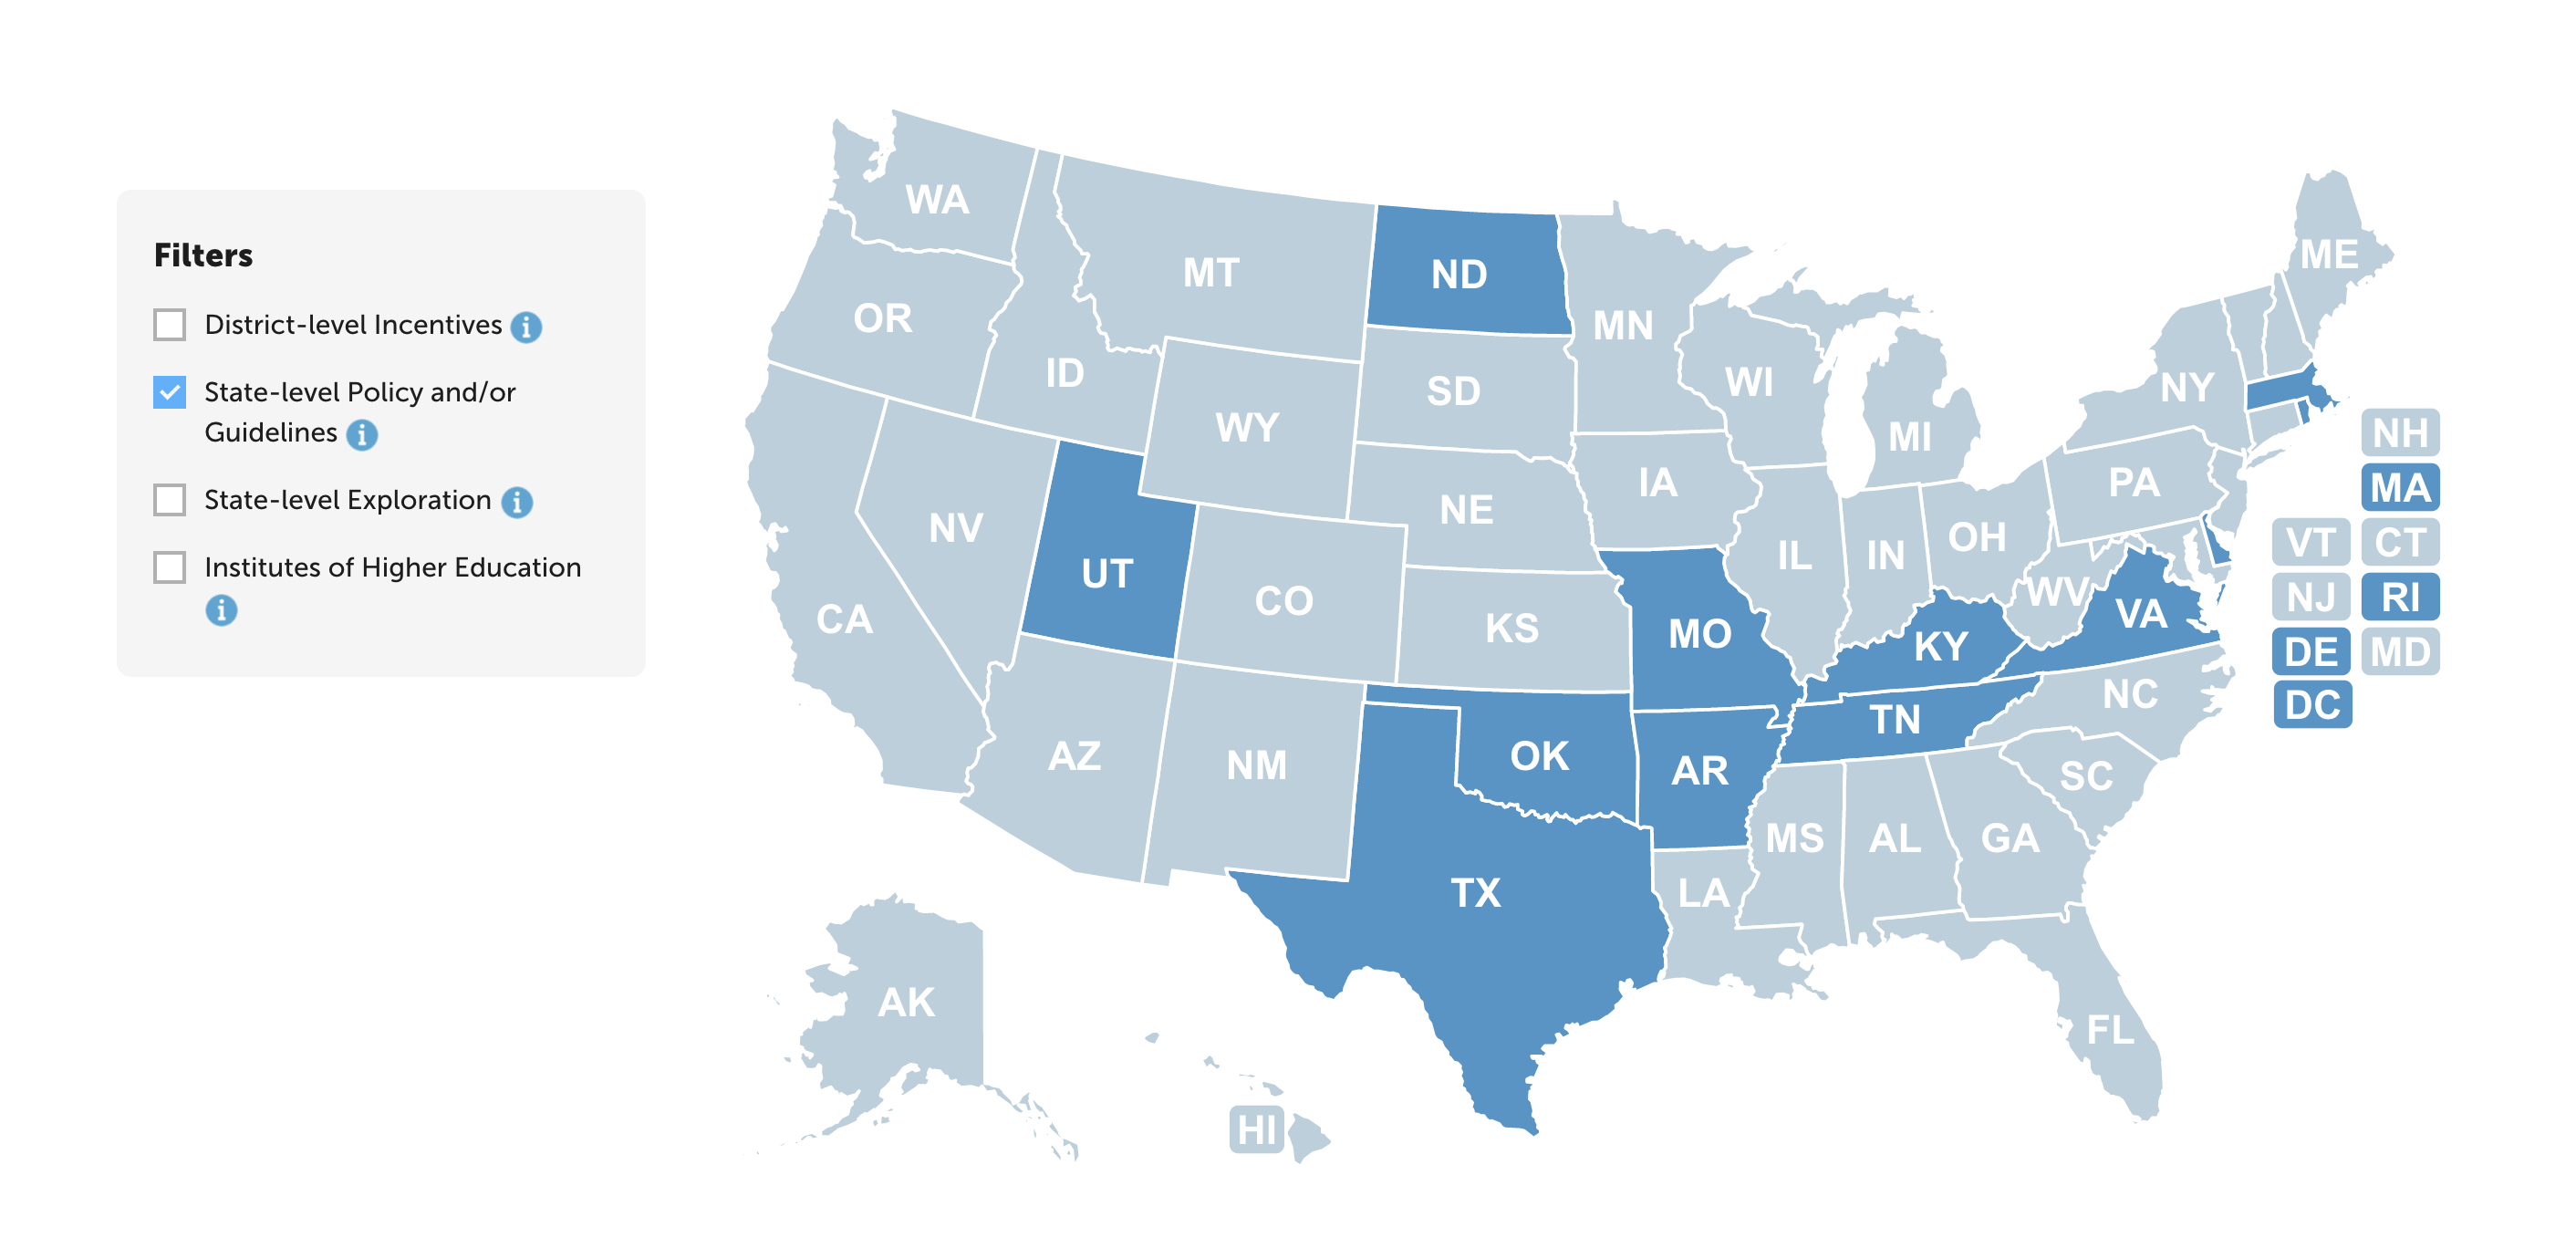 Screengrab of the Micro-credential Policy Map